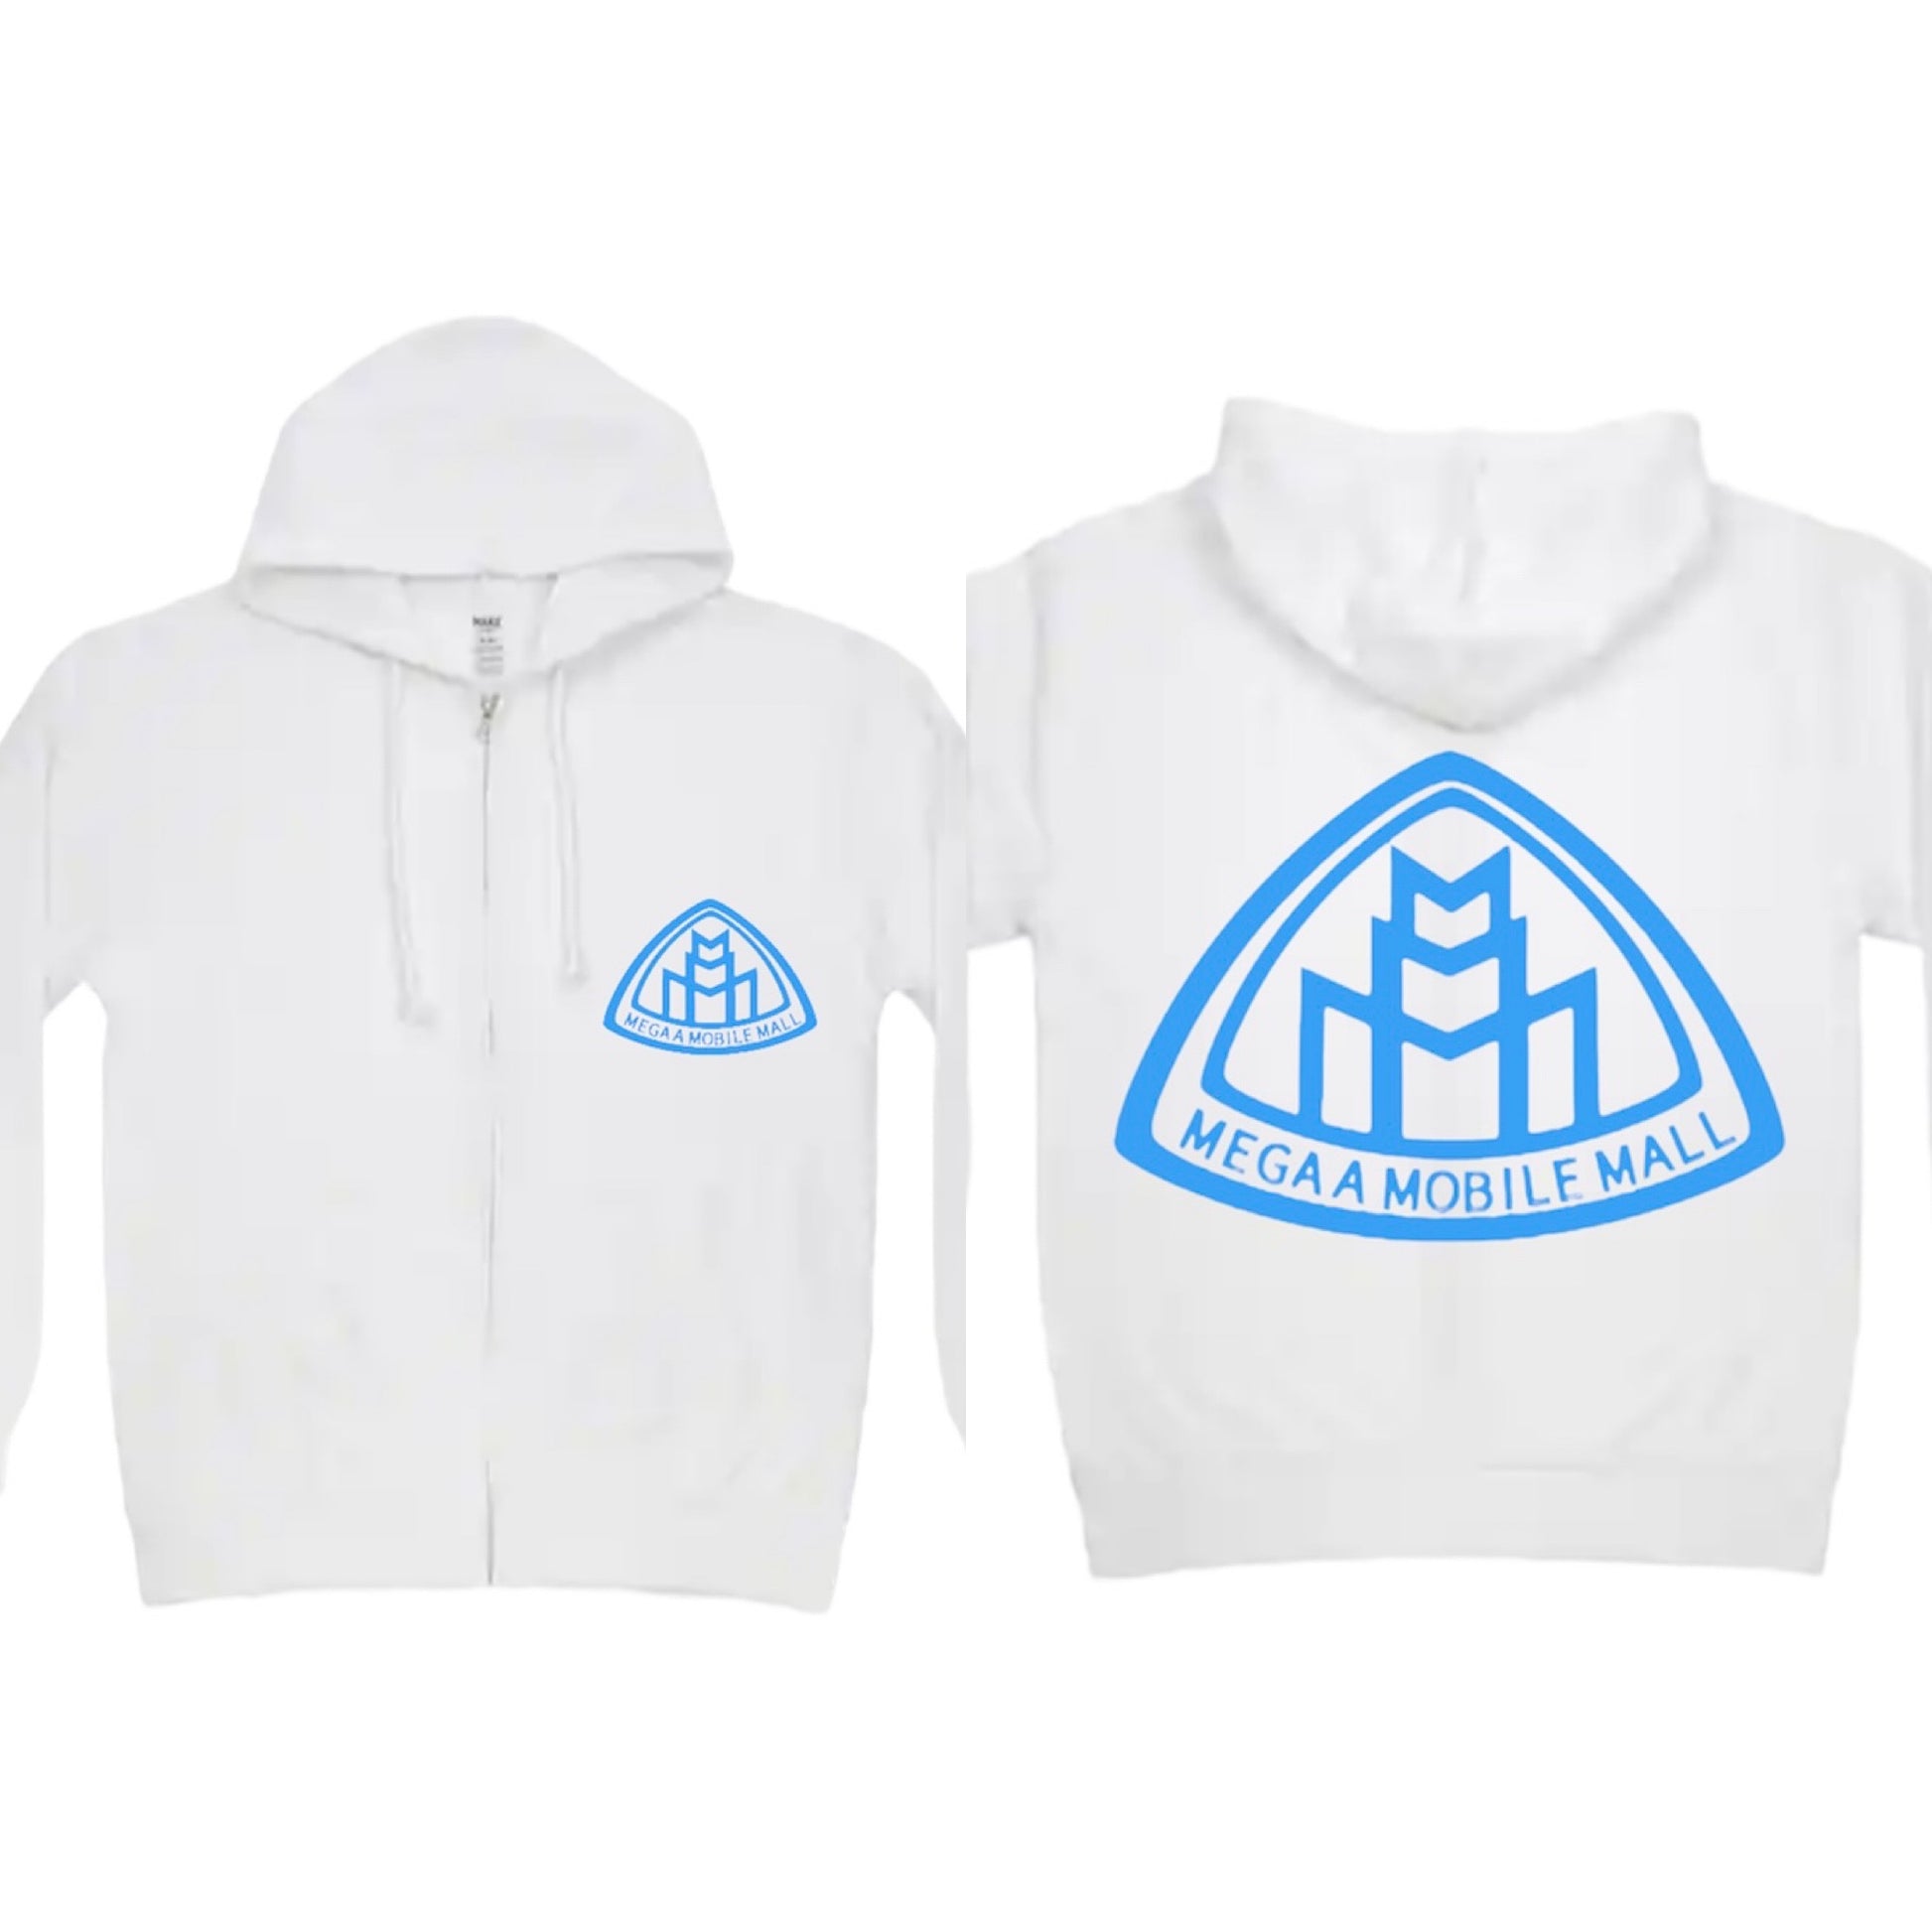 megaamobilemall white zip up hoodie with sky blue logo